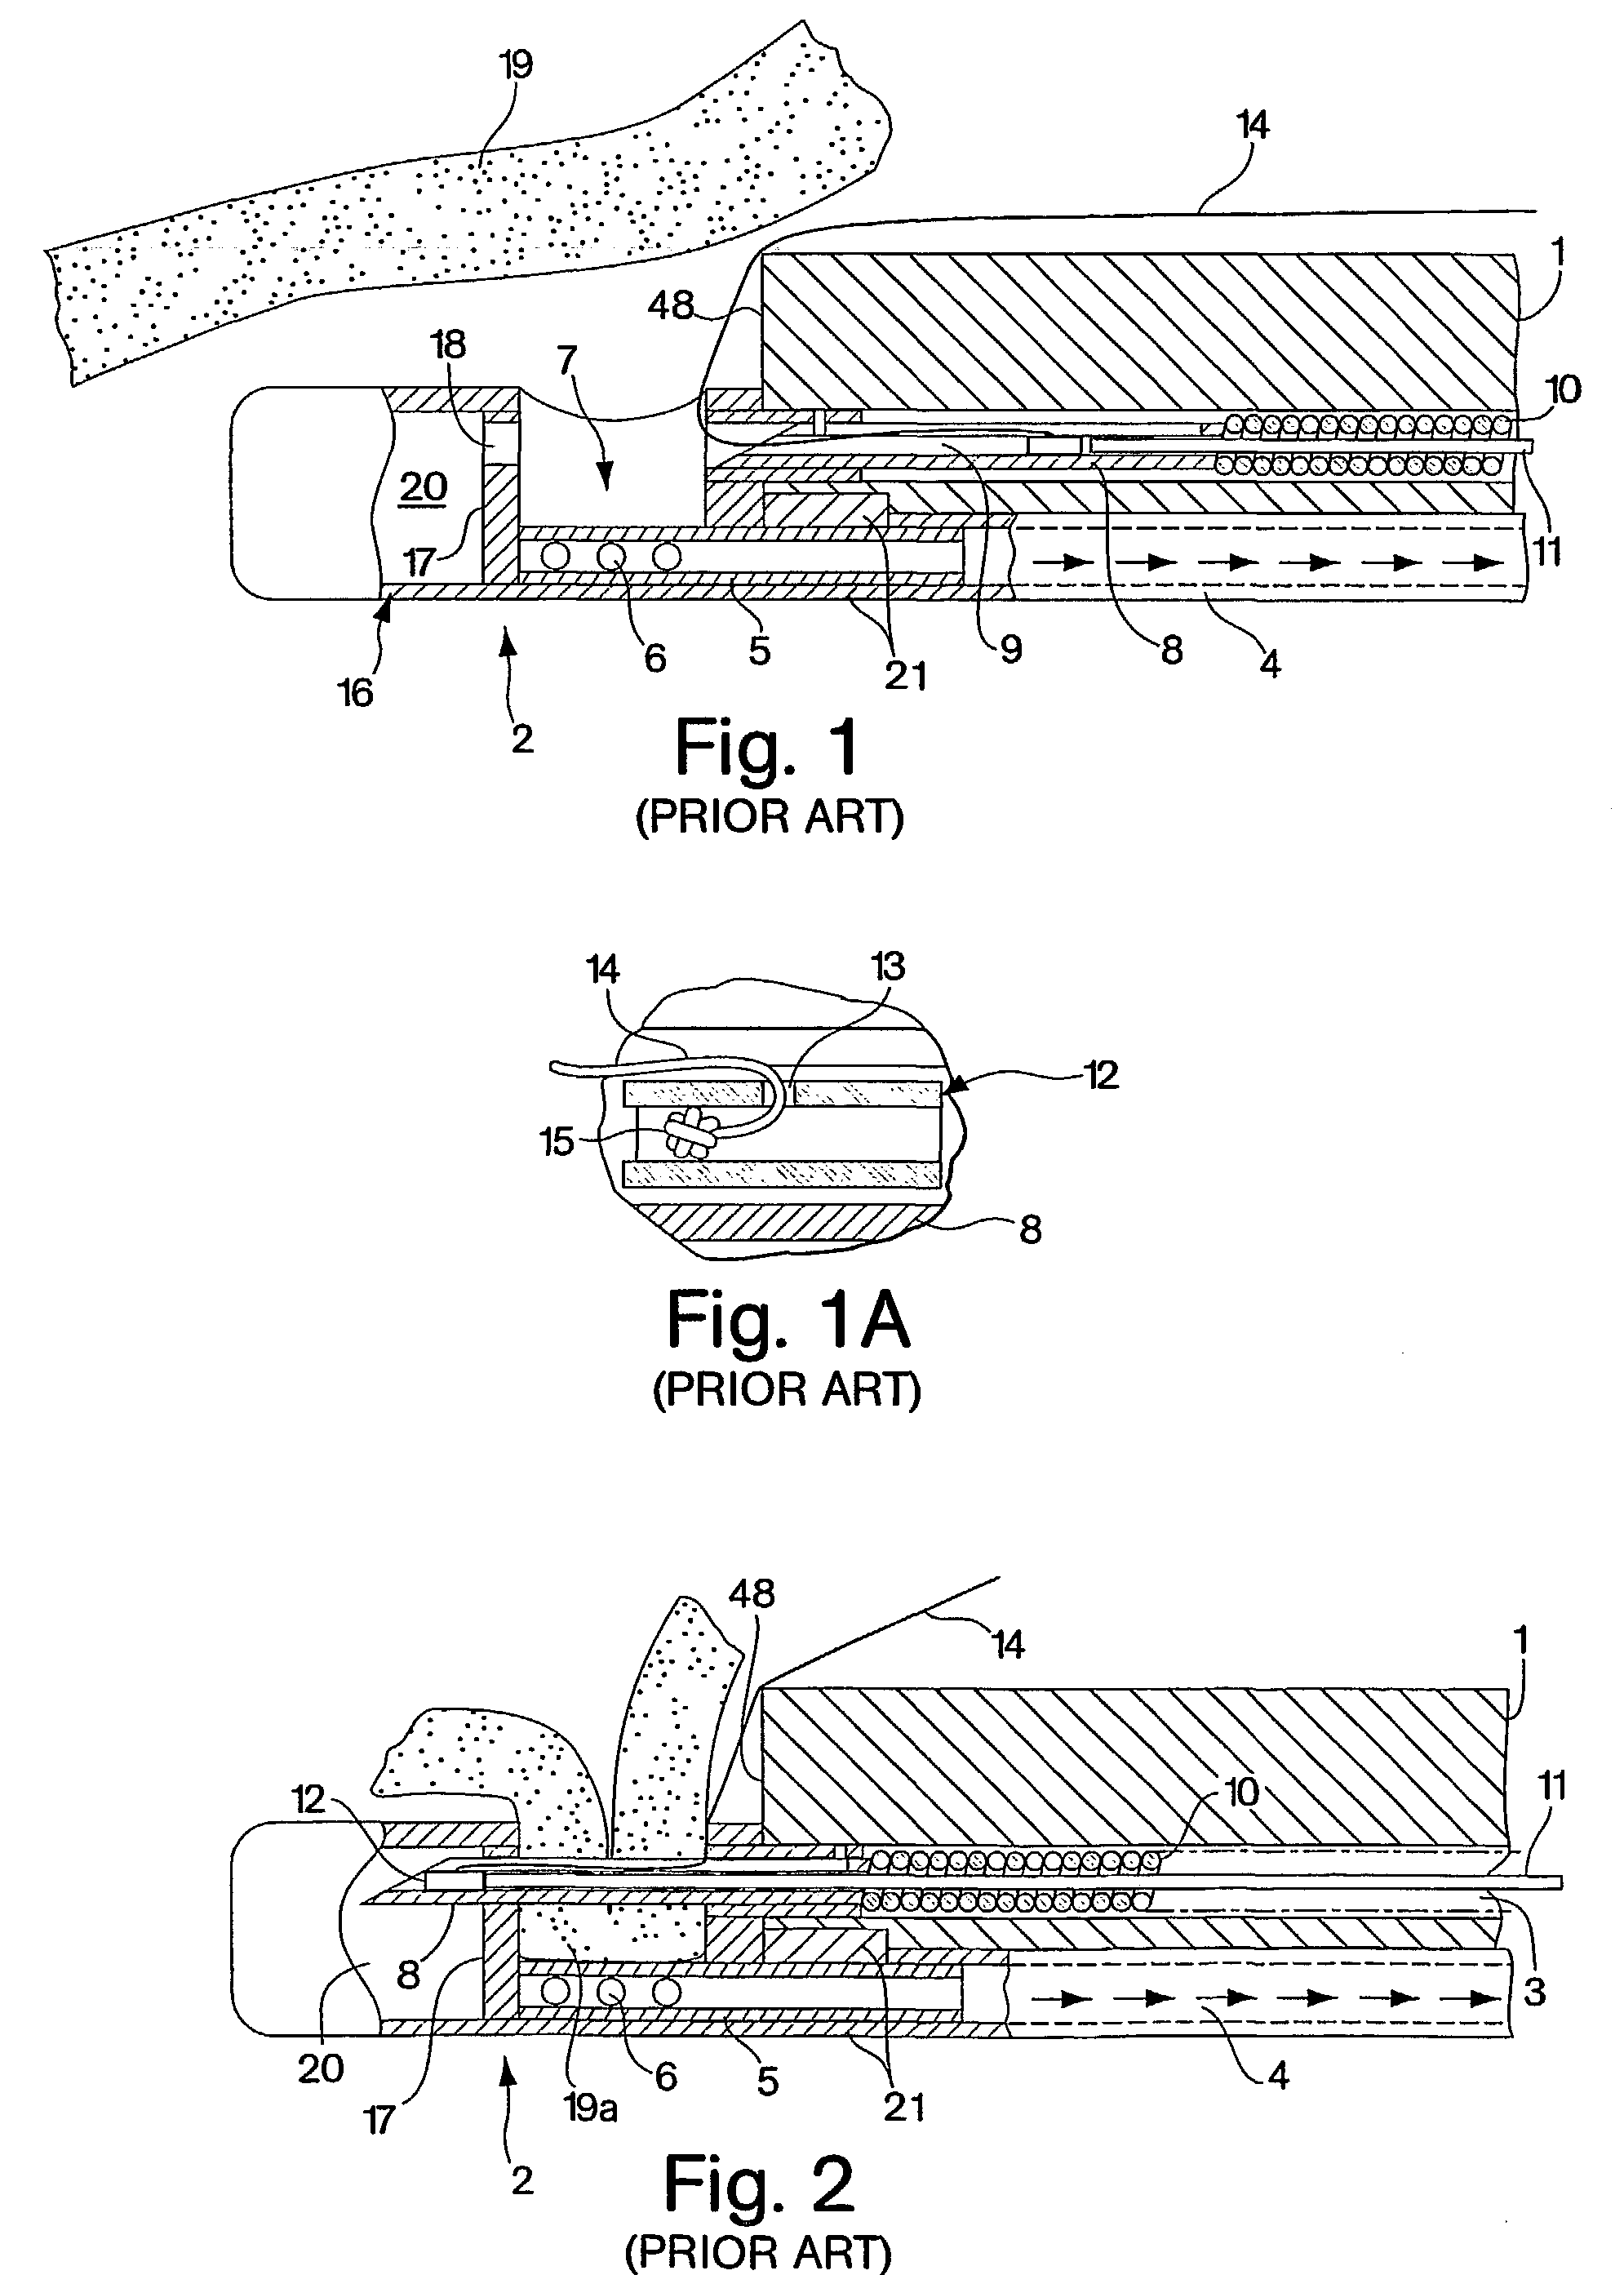 Endoscopic tissue apposition device with multiple suction ports